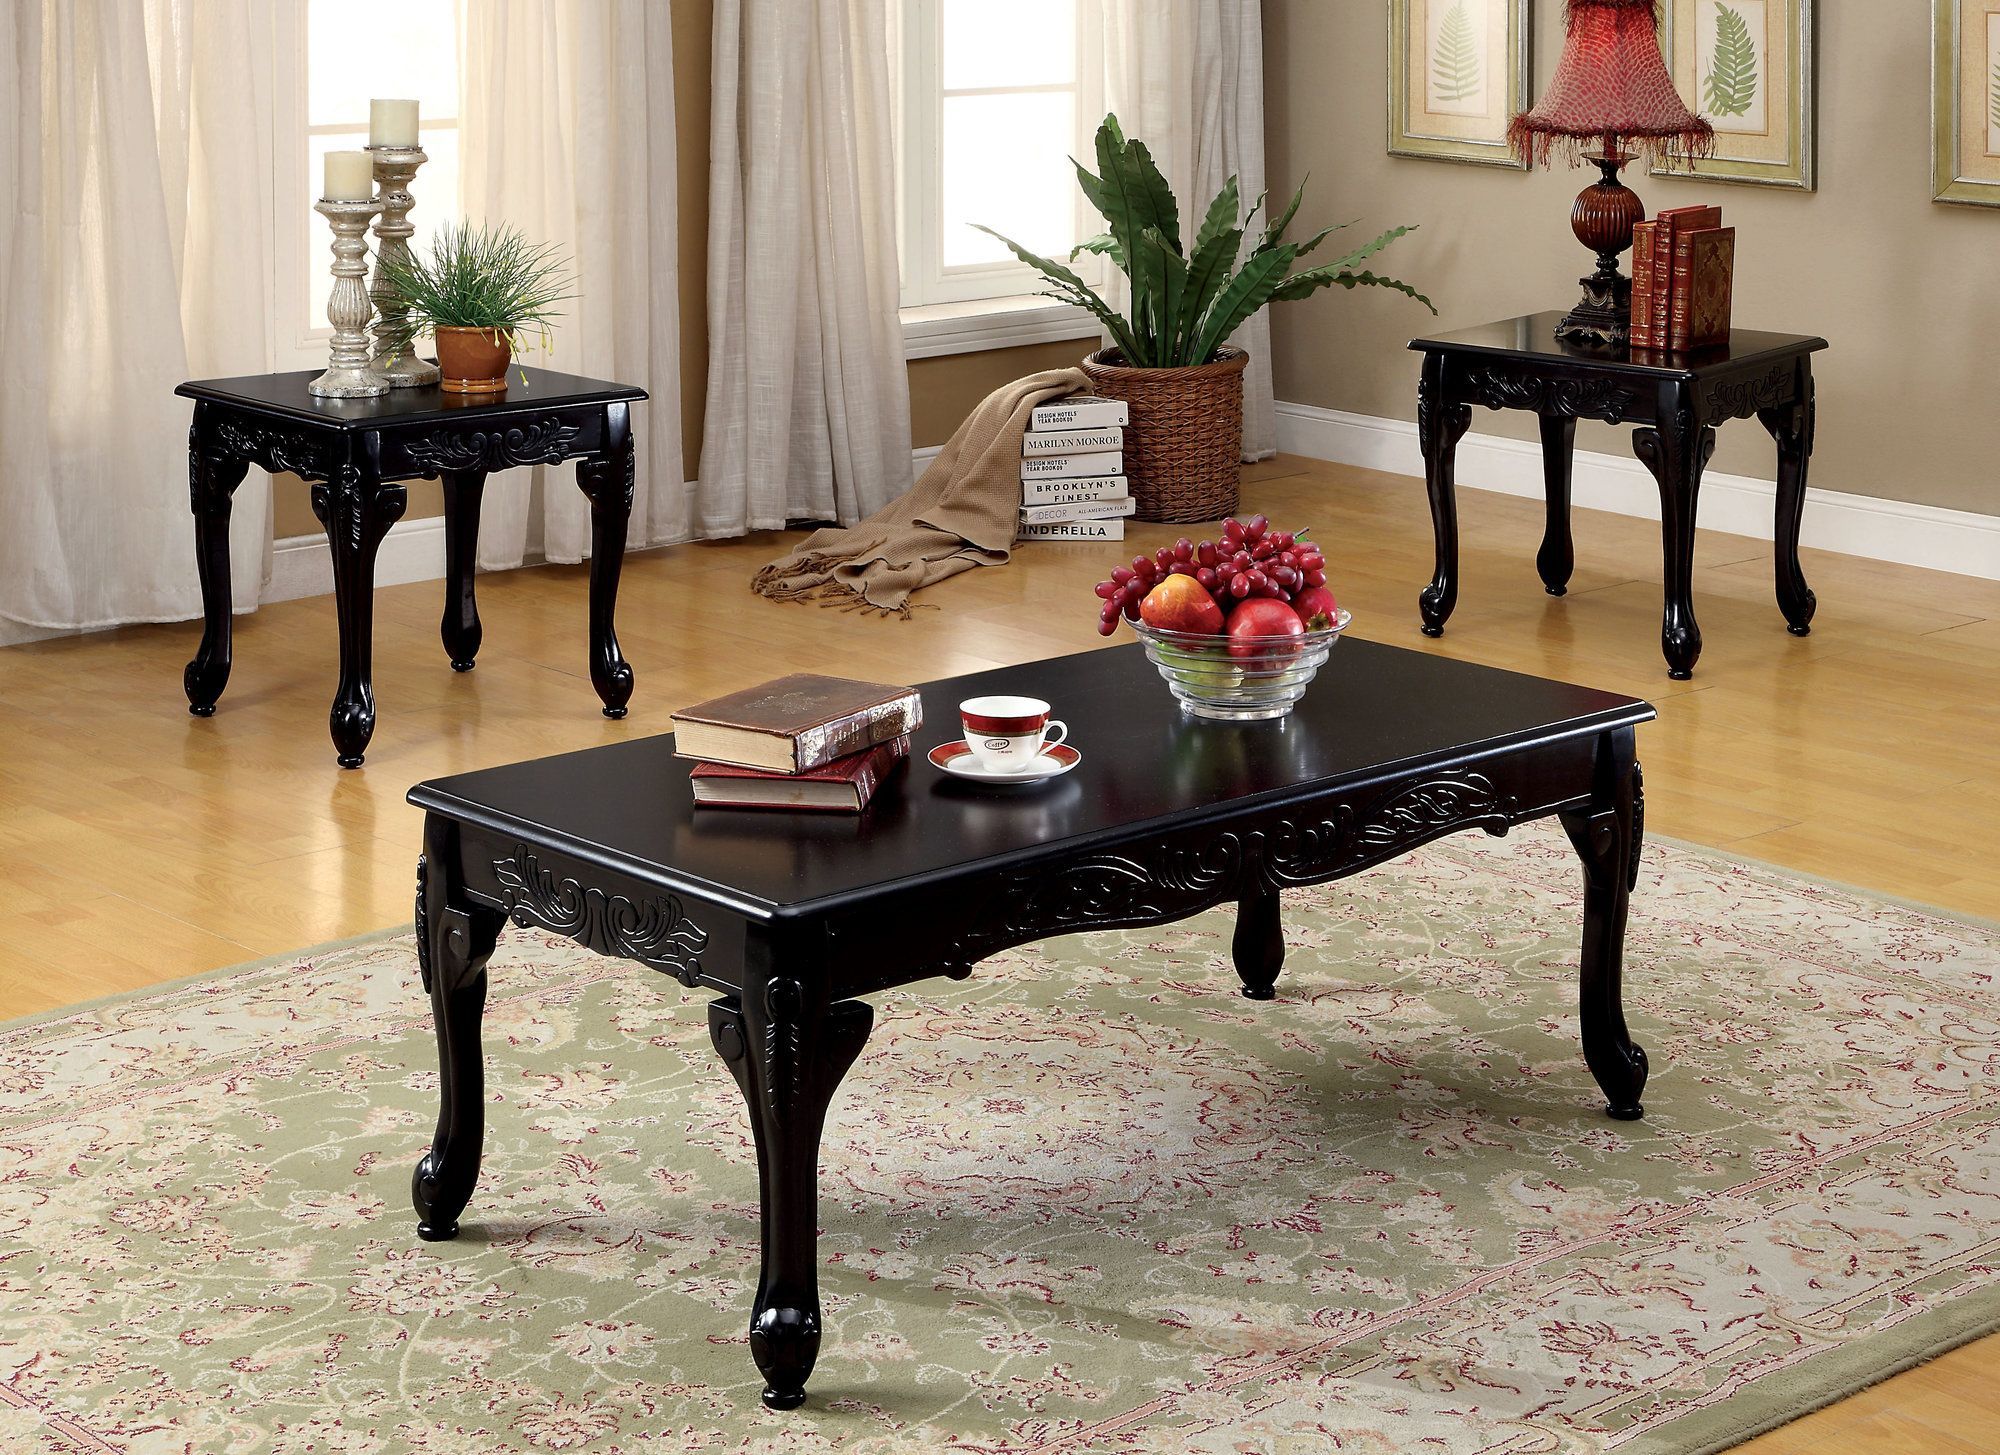 Harrietta 3 Piece Coffee Table Set | Coffee Table Setting Within 3 Piece Coffee Tables (View 10 of 15)